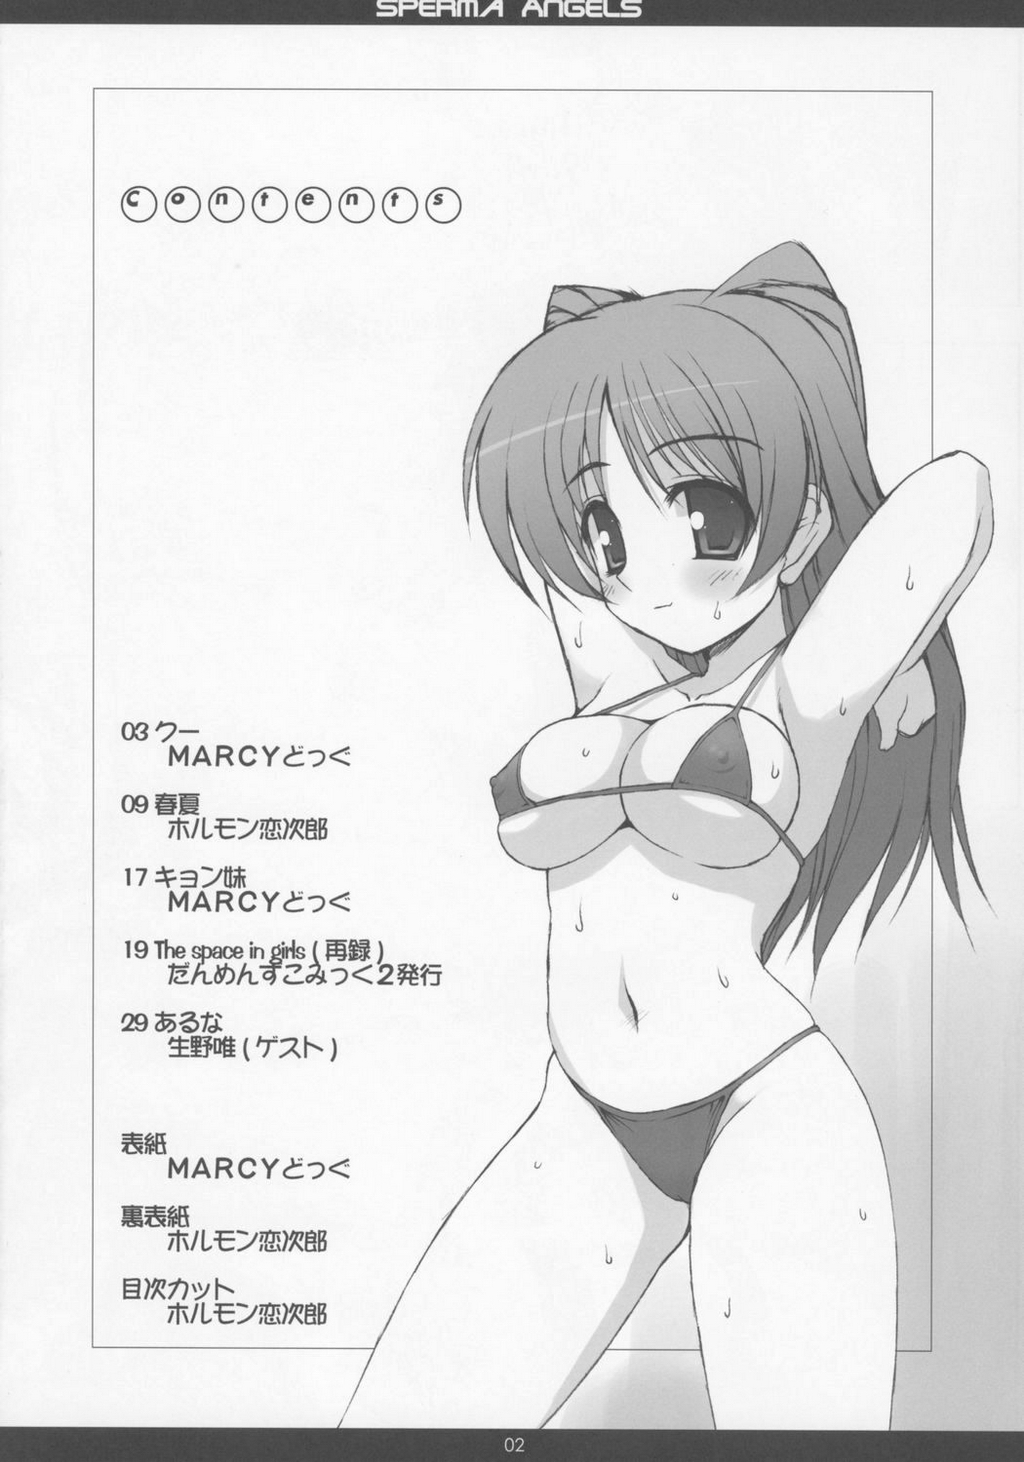 (C71)[Chokudoukan] SPERMA ANGELS page 3 full